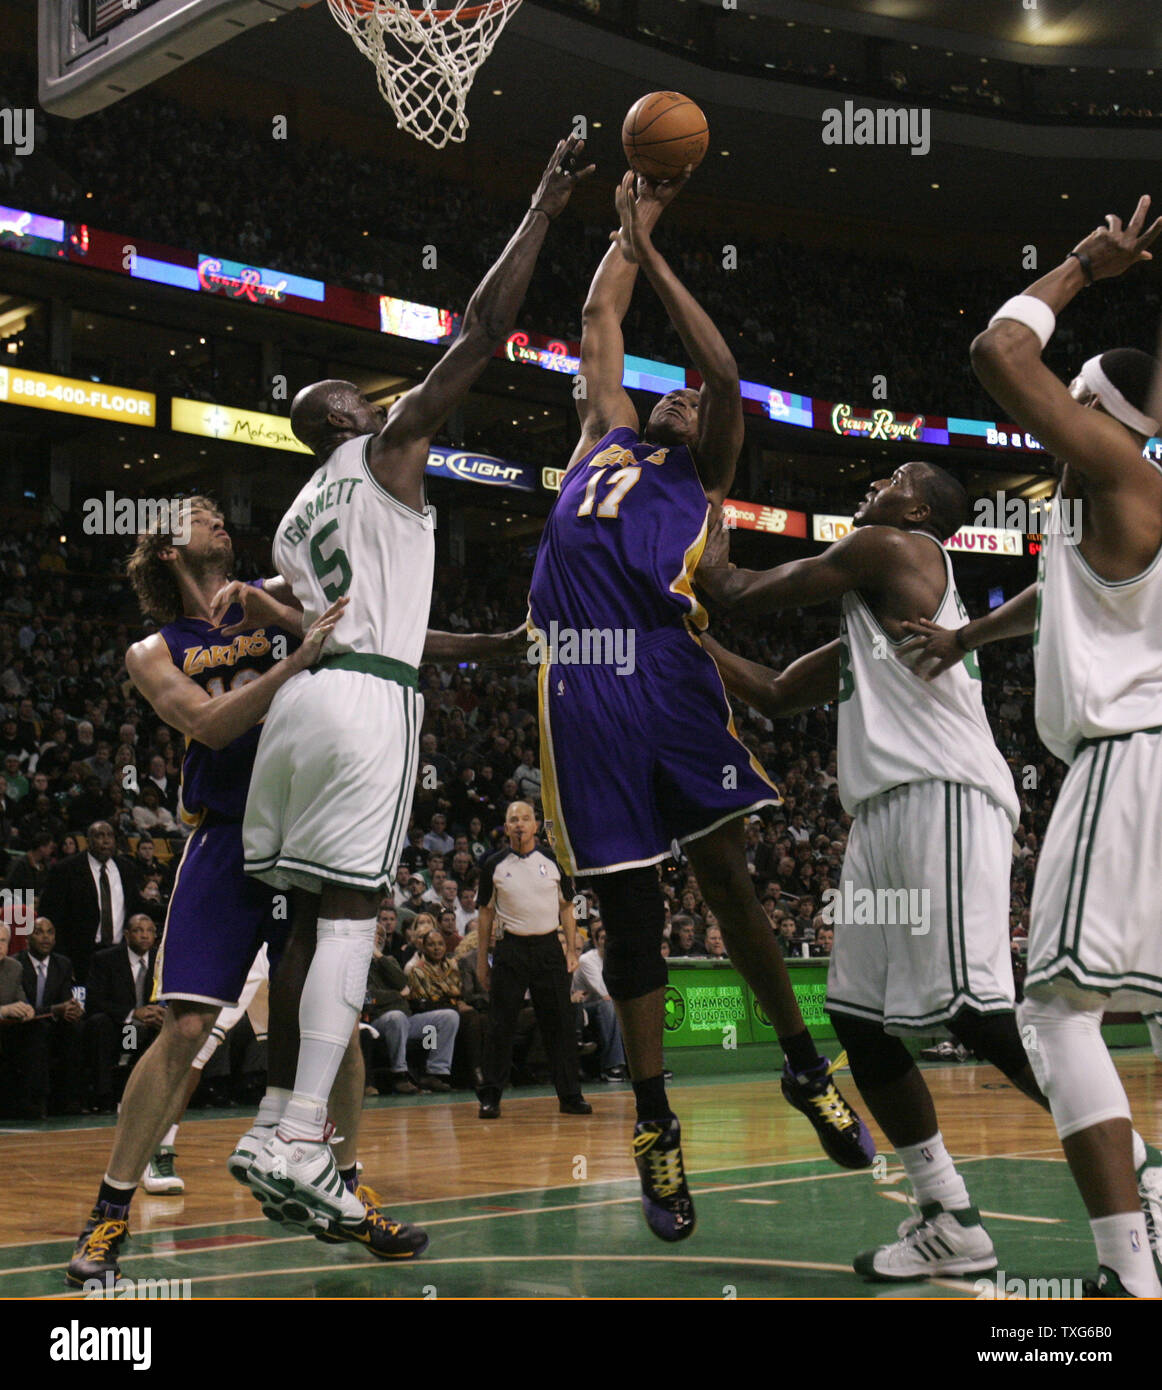 Los Angeles Lakers center Andrew Bynum (17) goes up for two points against Boston Celtics forward Kevin Garnett (5) in the second half half at the TD Garden in Boston, Massachusetts on January 31, 2010.  The Lakers defeated the Celtics 90-89.   UPI/Matthew Healey Stock Photo